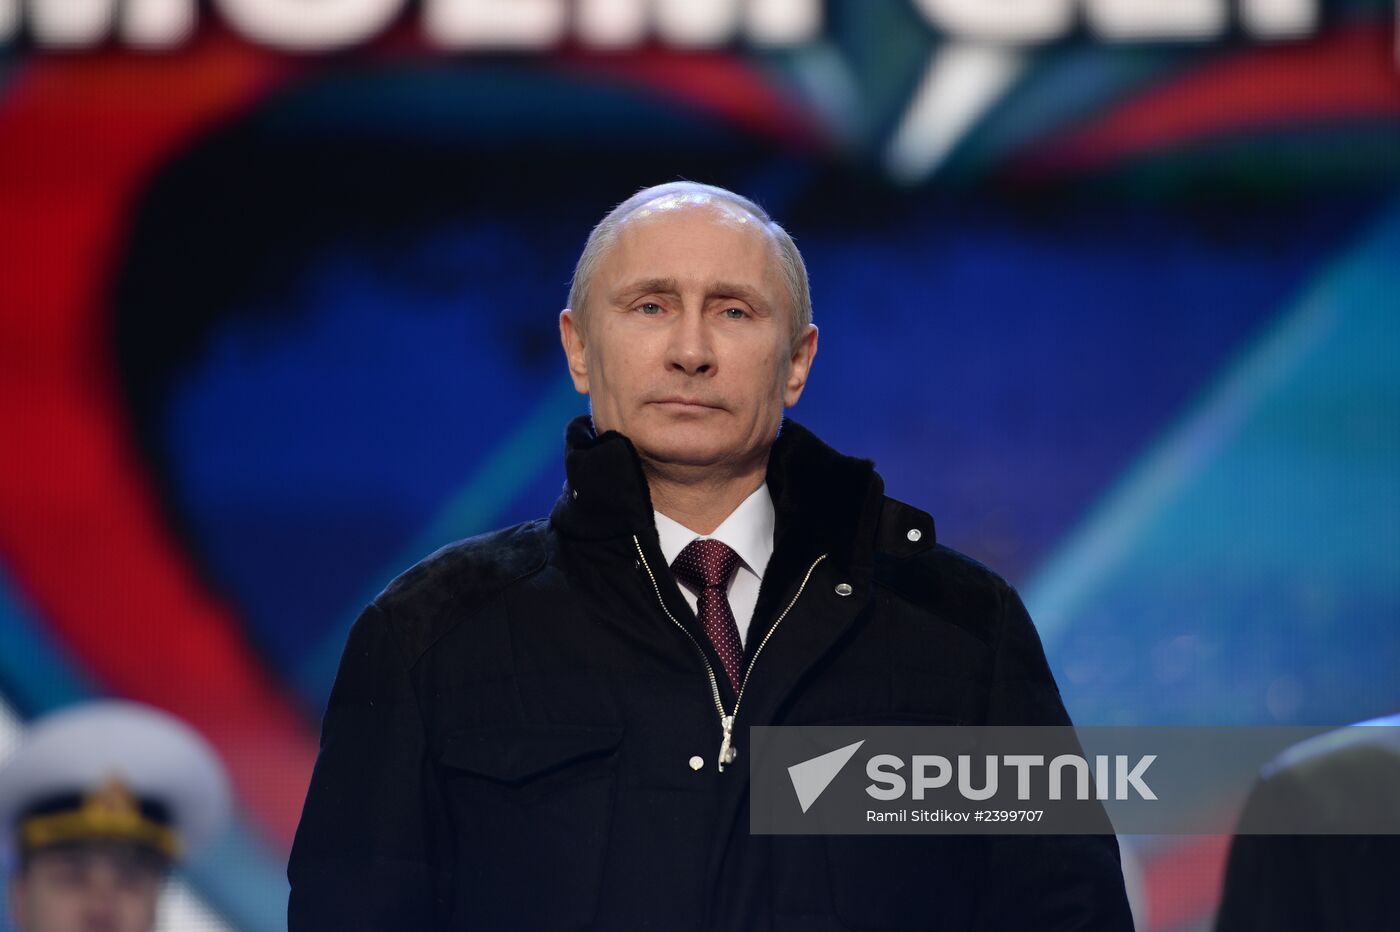 Vladimir Putin attends rally concert "We are Together!" on Red Square